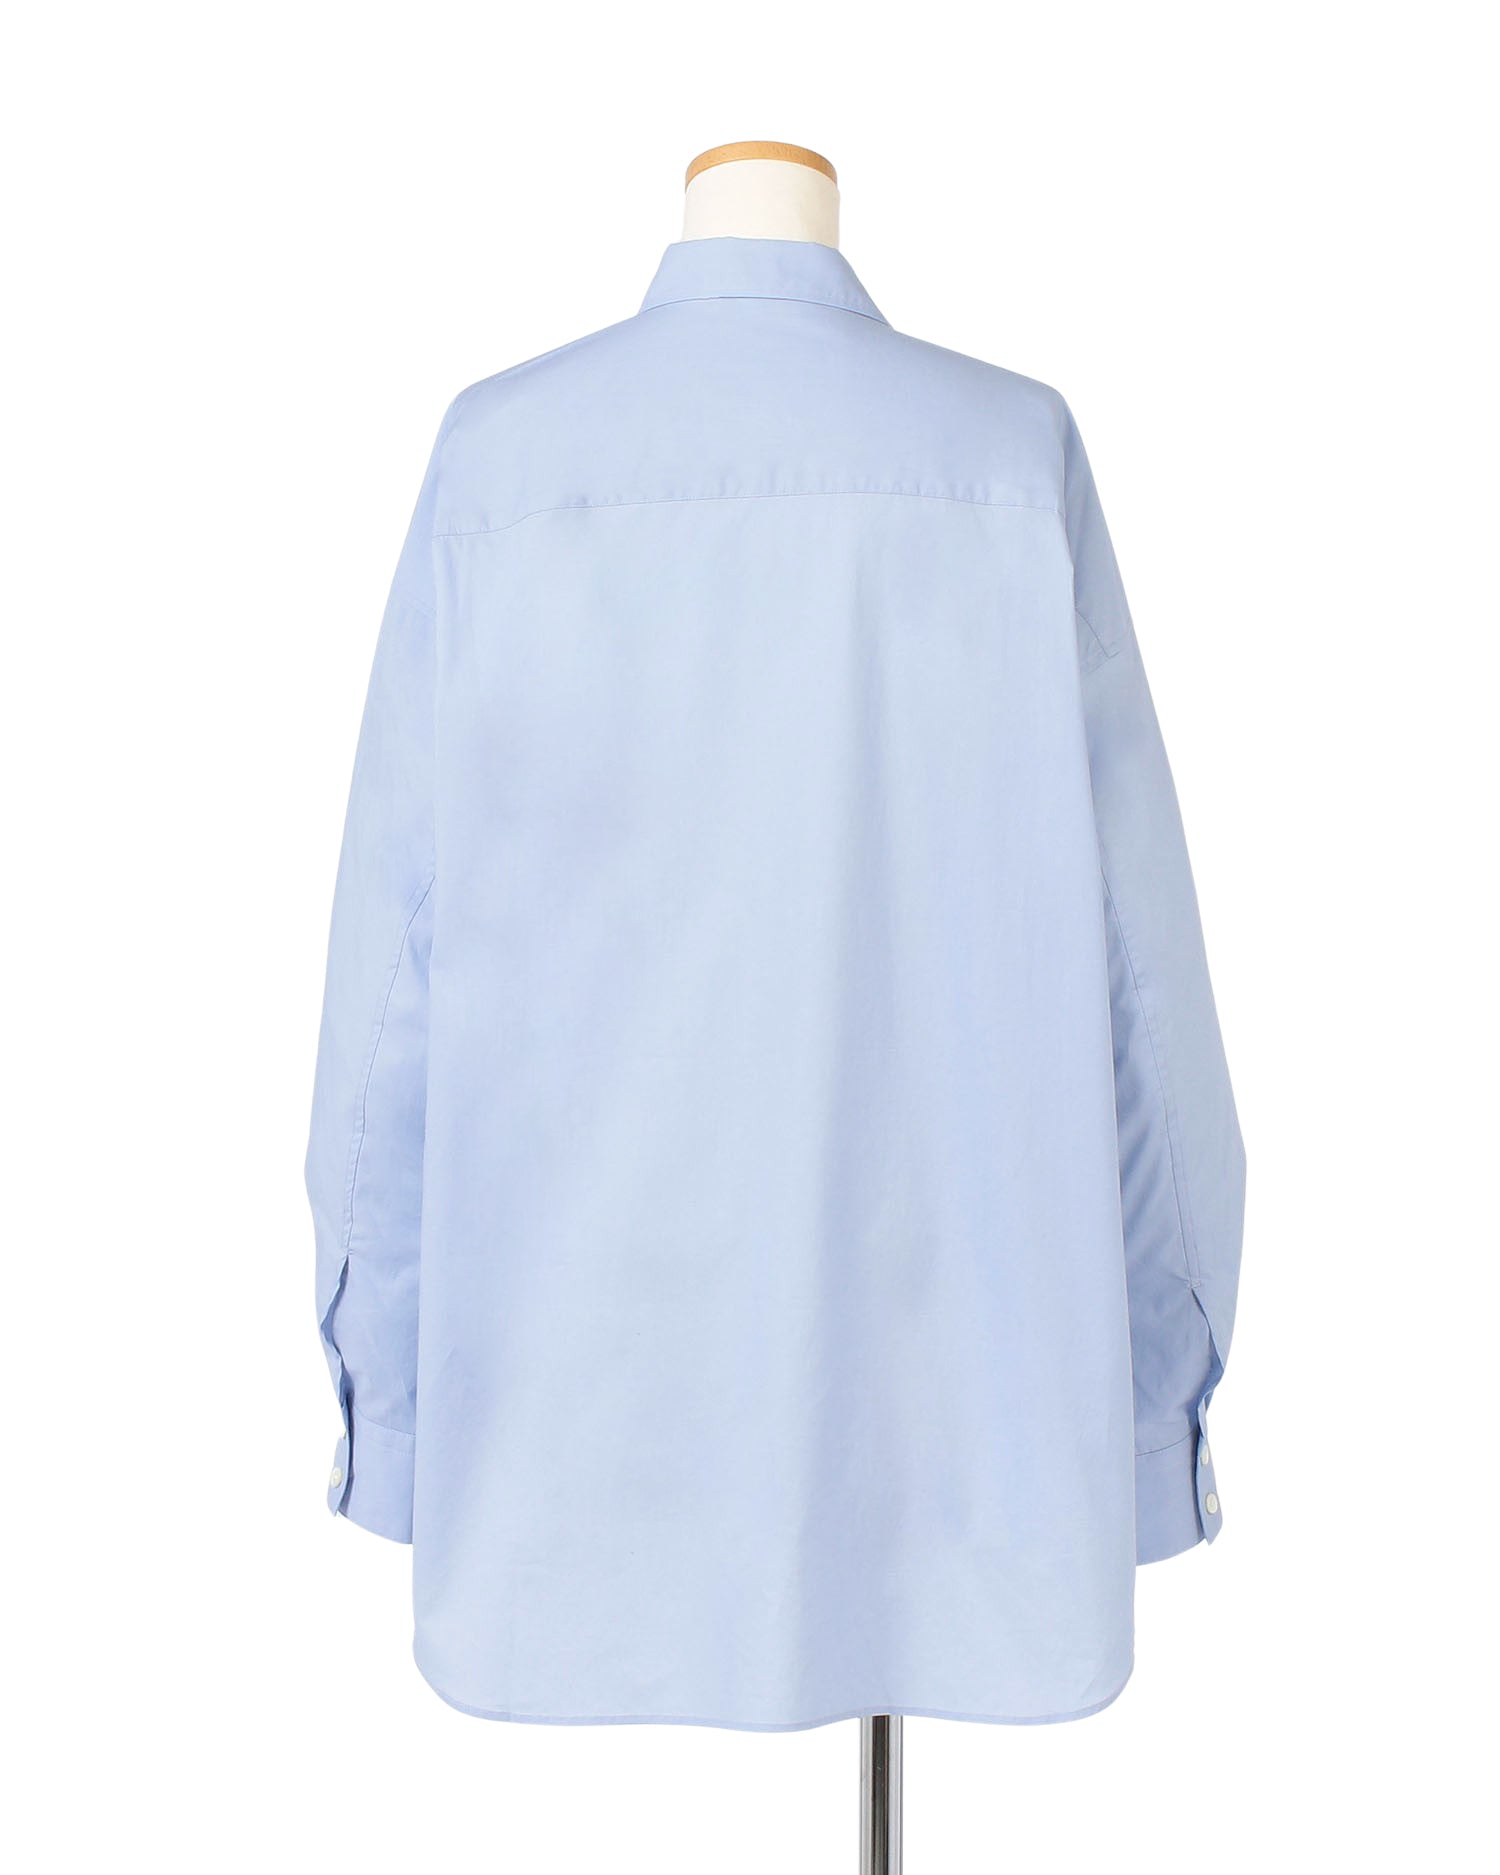 [Order sales] HAUNT for AMARC SILKY LOOSE SHIRT